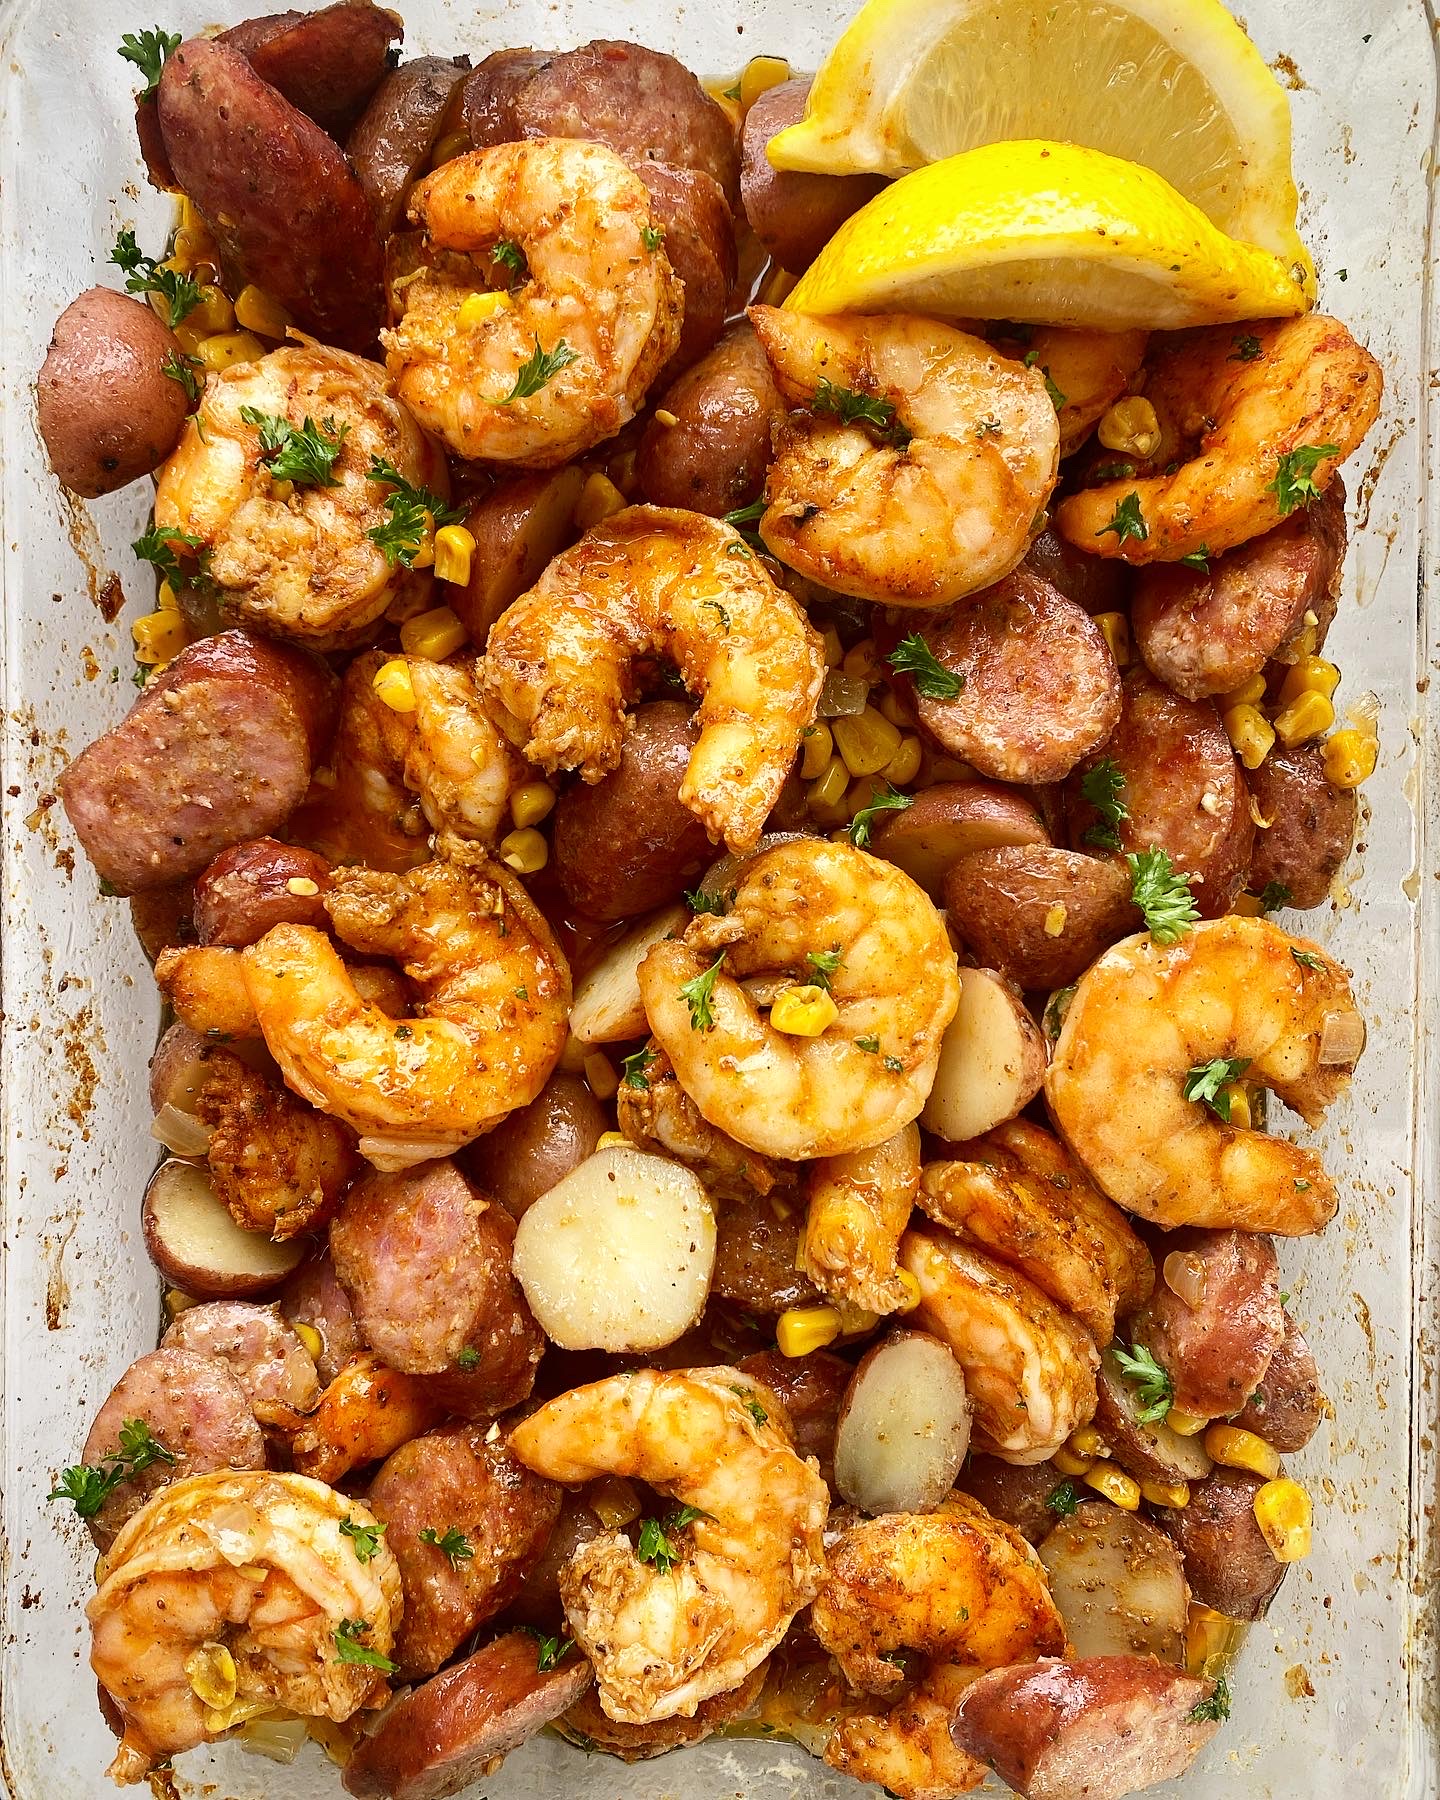 shrimp boil casserole mixed up in a baking dish with lemon wedges